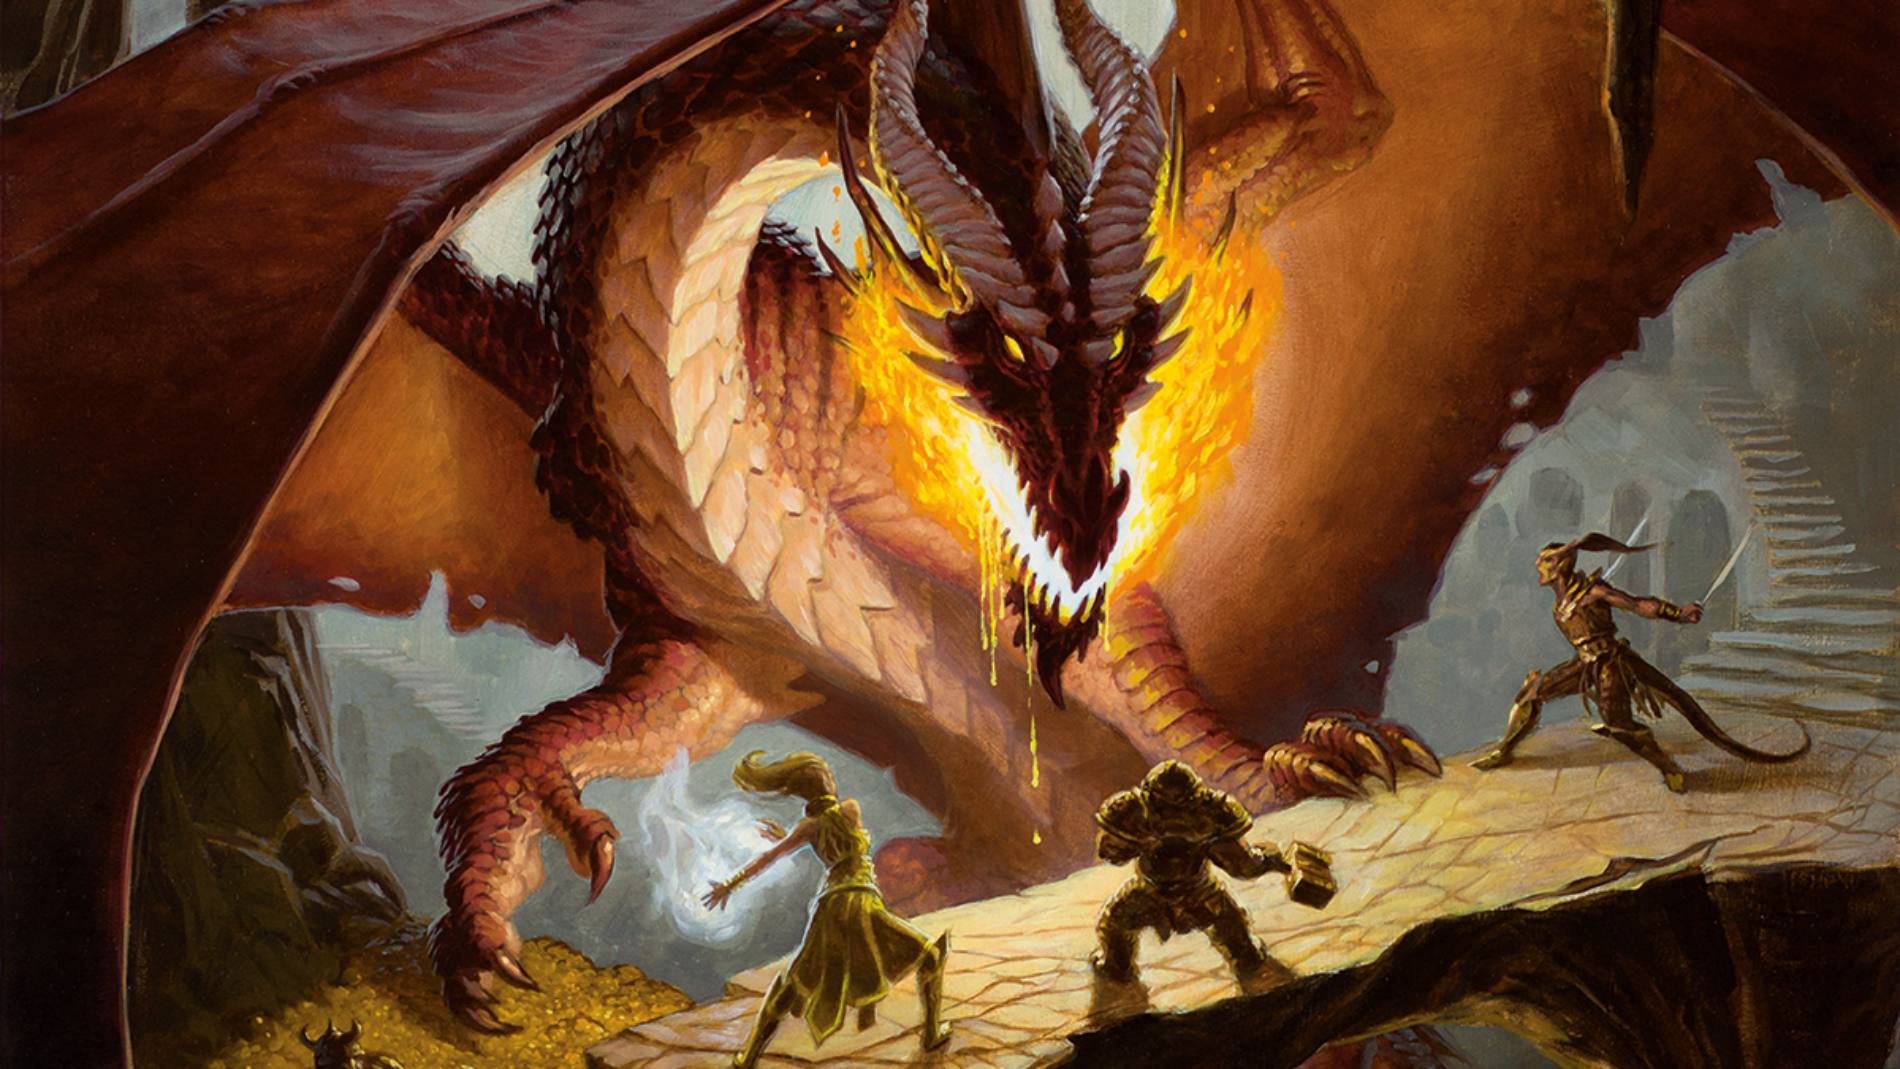 “We rolled a 1”: D&D publisher addresses backlash over controversial license